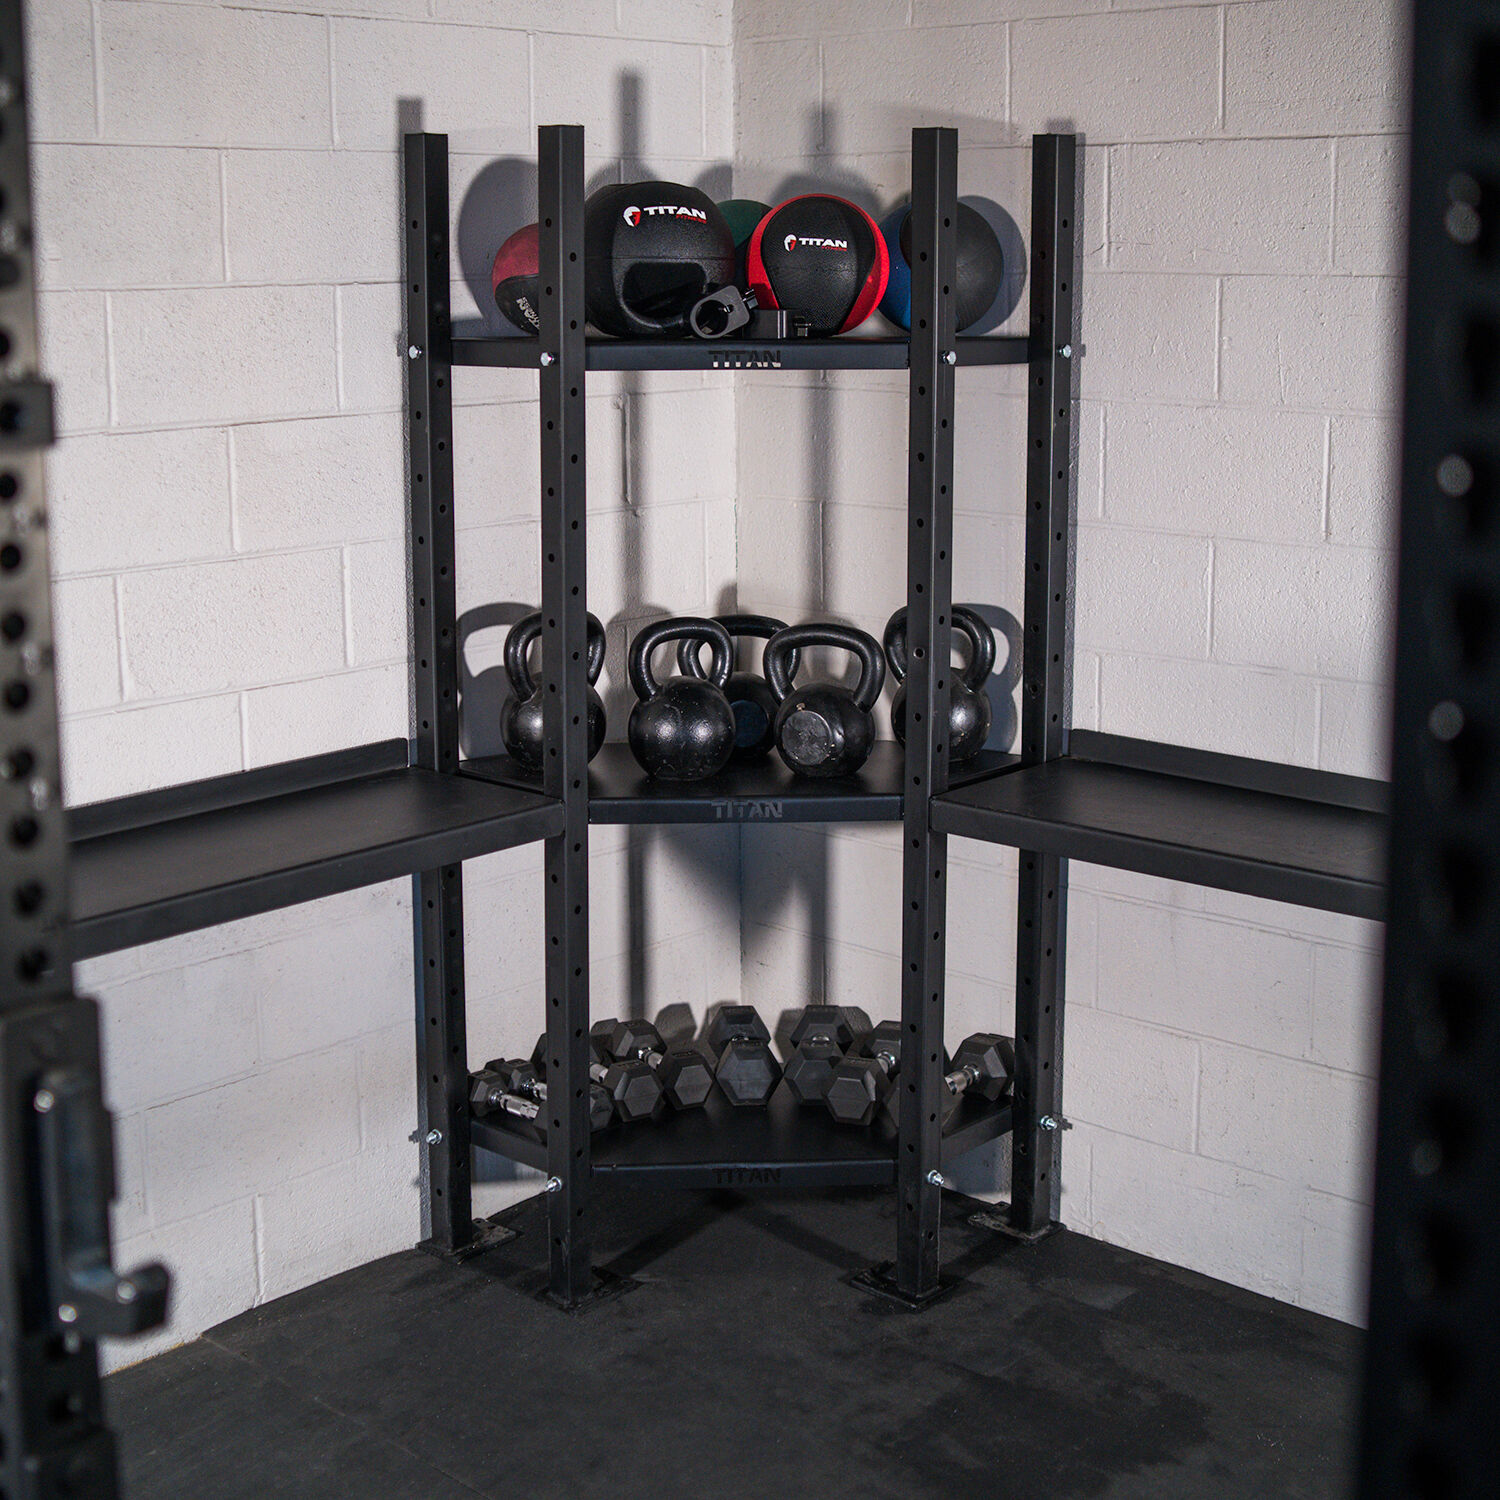 Titan Dumbbell Tray for Mass Storage System